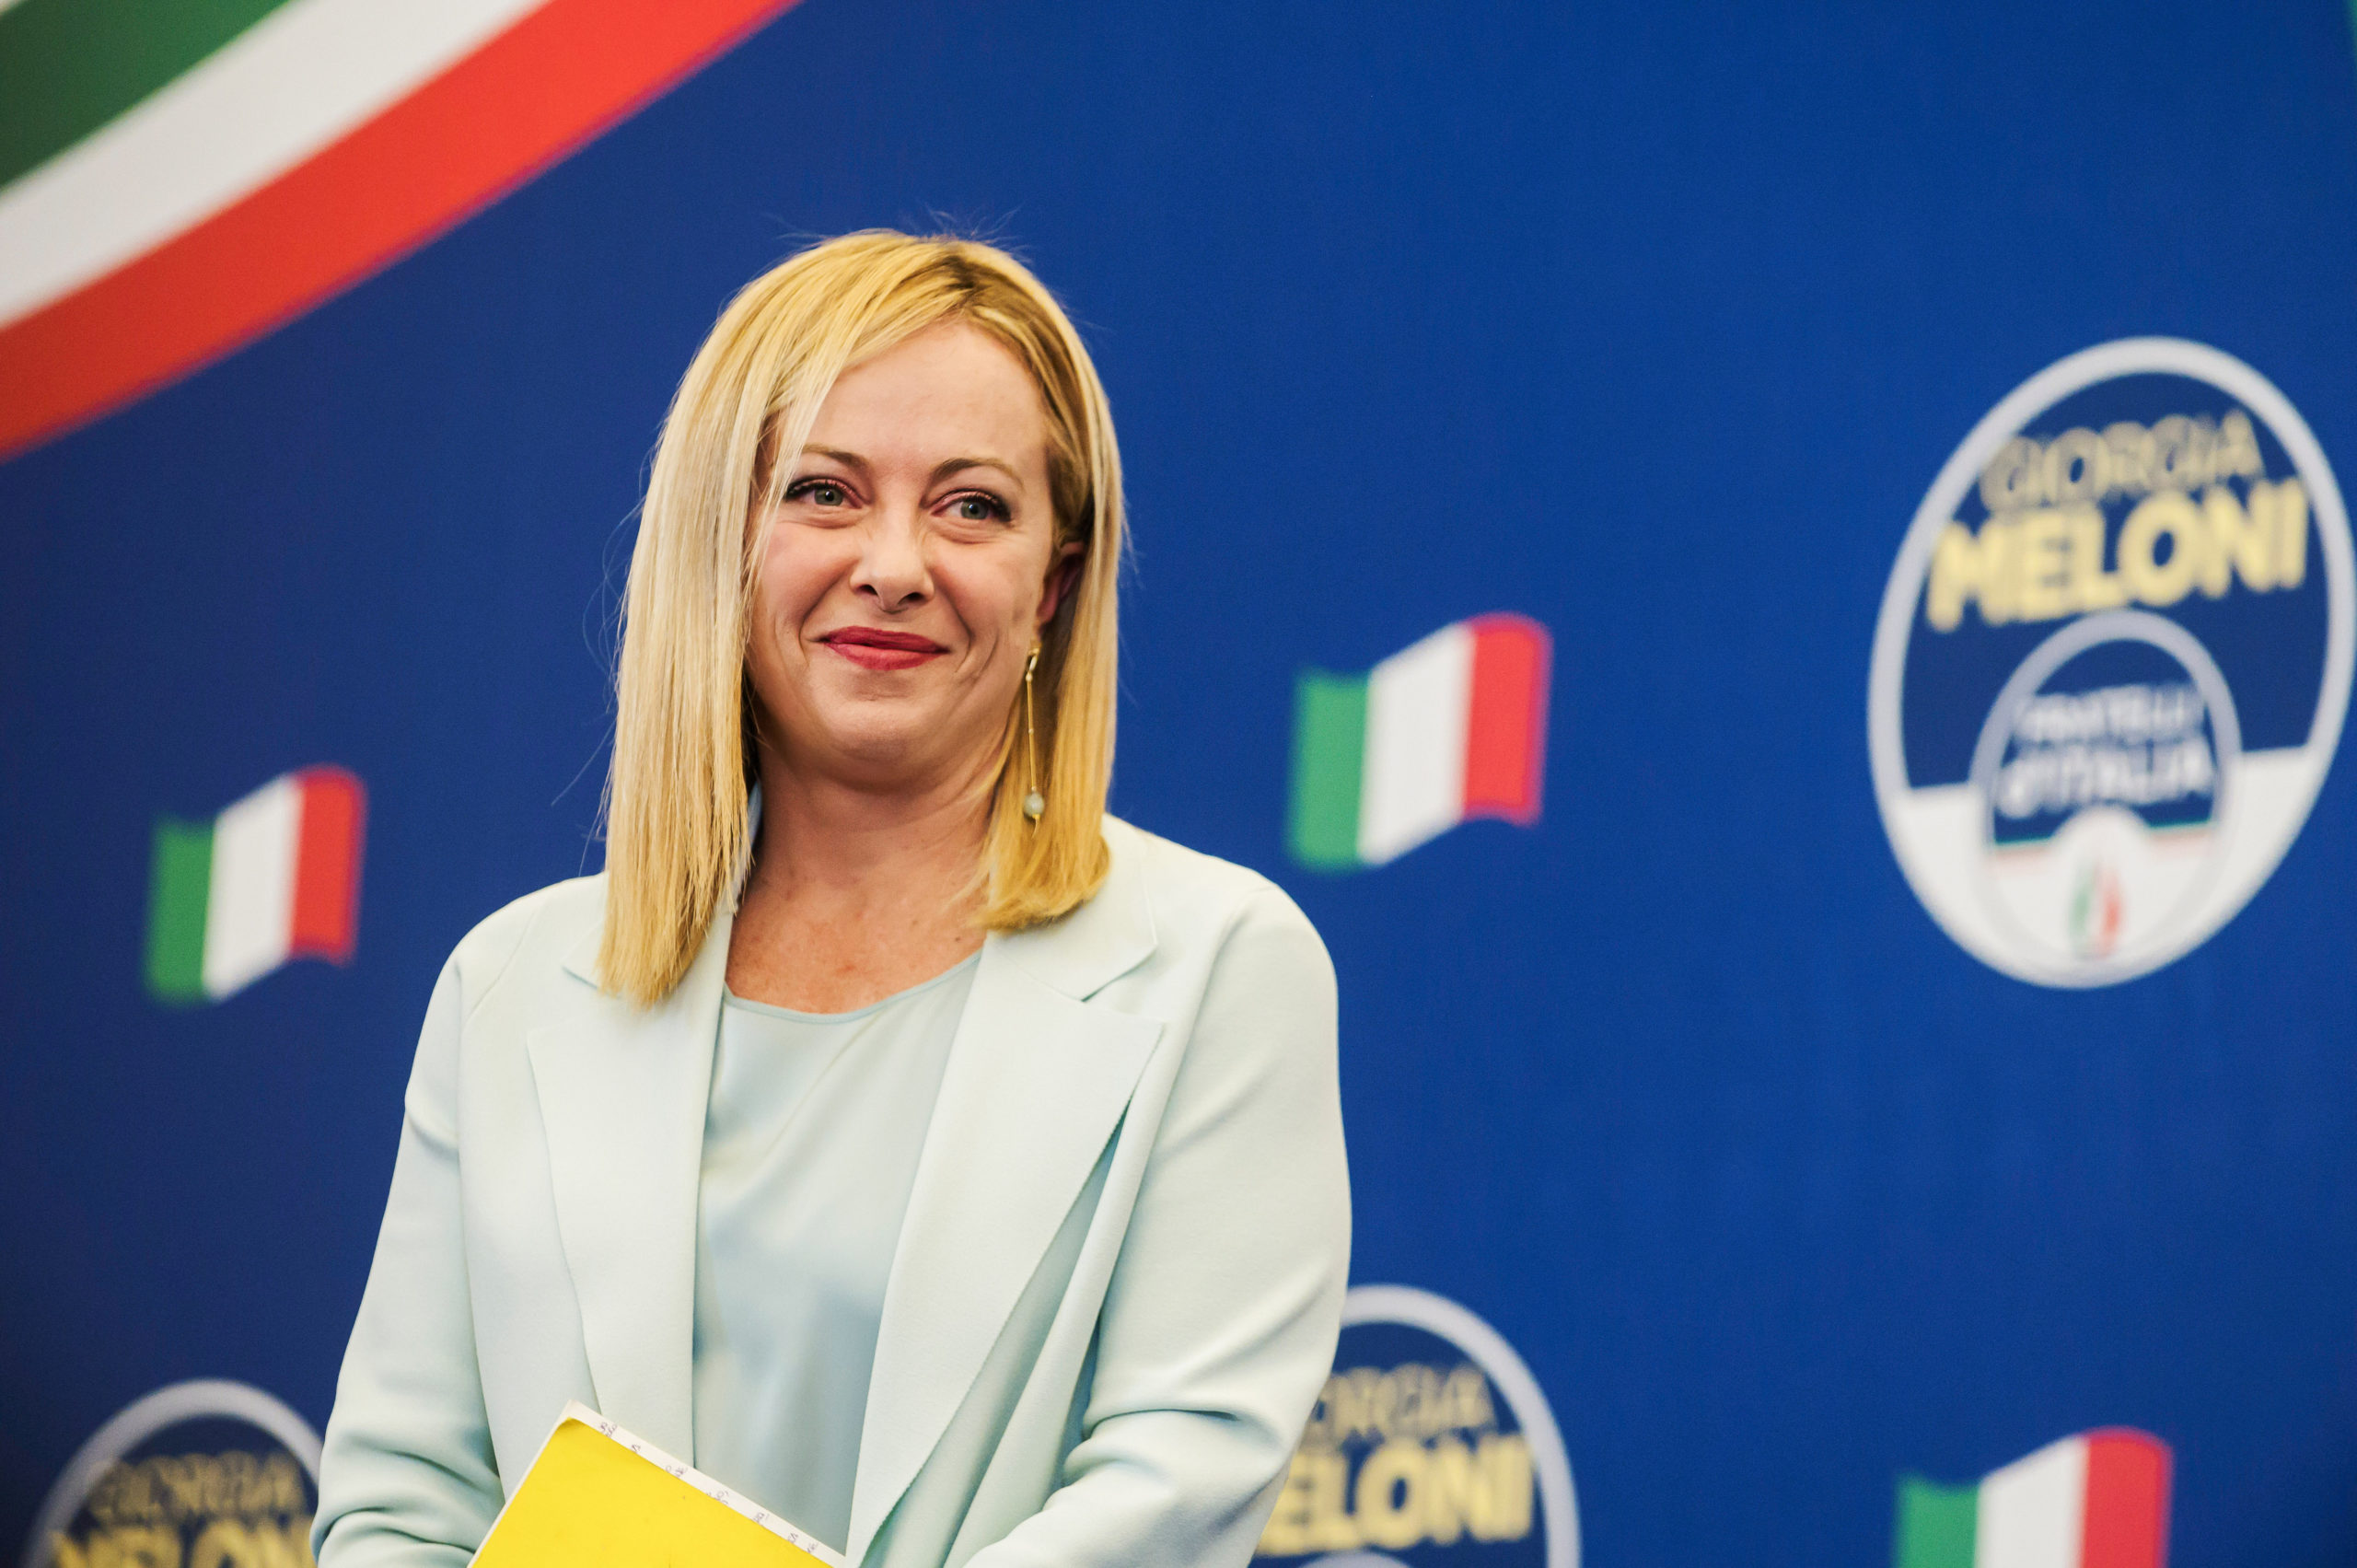 Giorgia Meloni is seen during a press conference